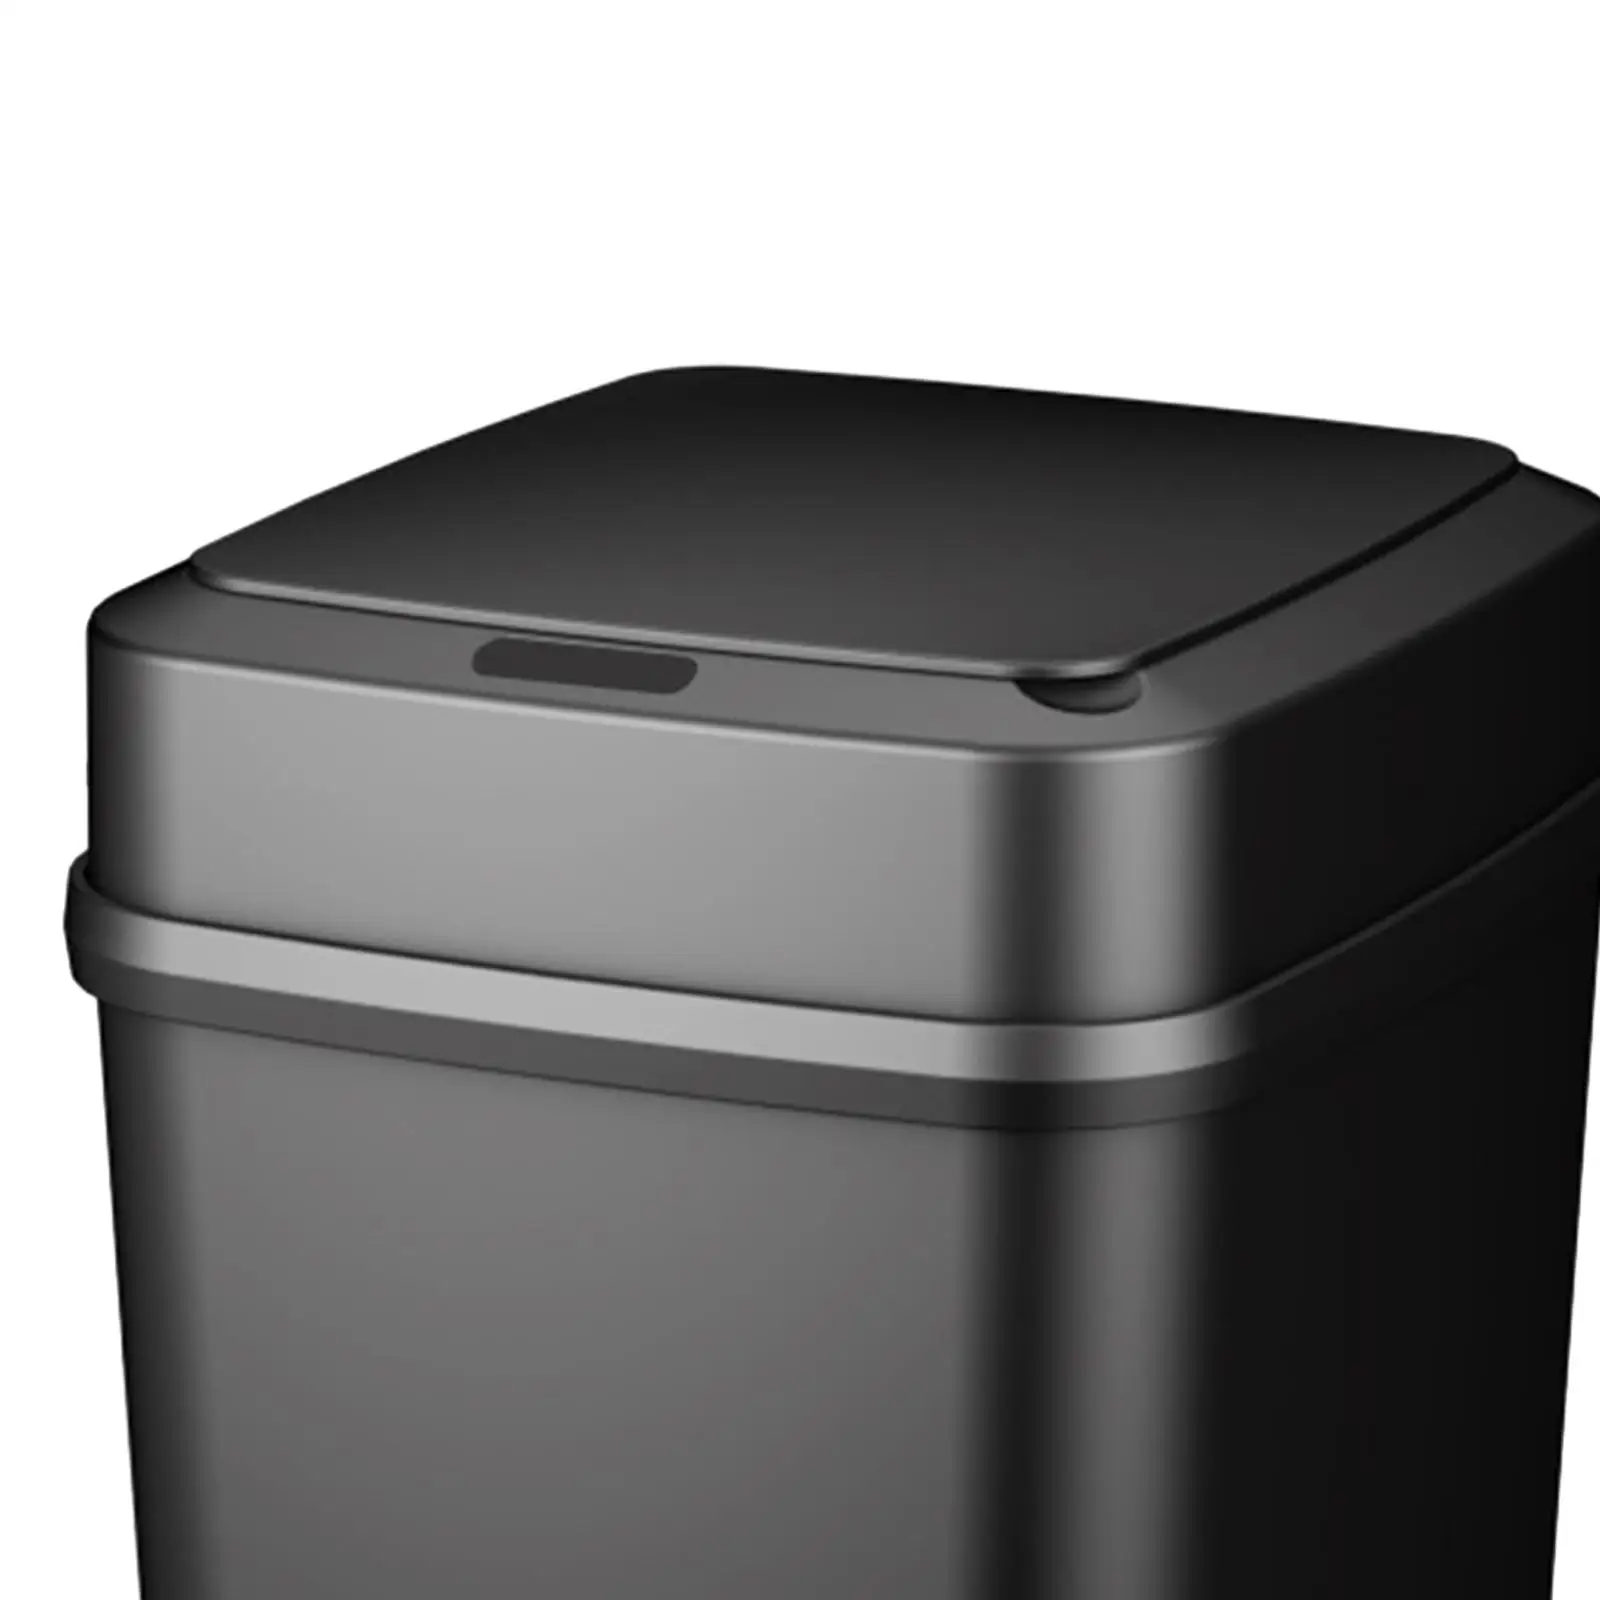 Touchless Trash Can 13L Automatic Garbage Can for Living Room Office Bedroom